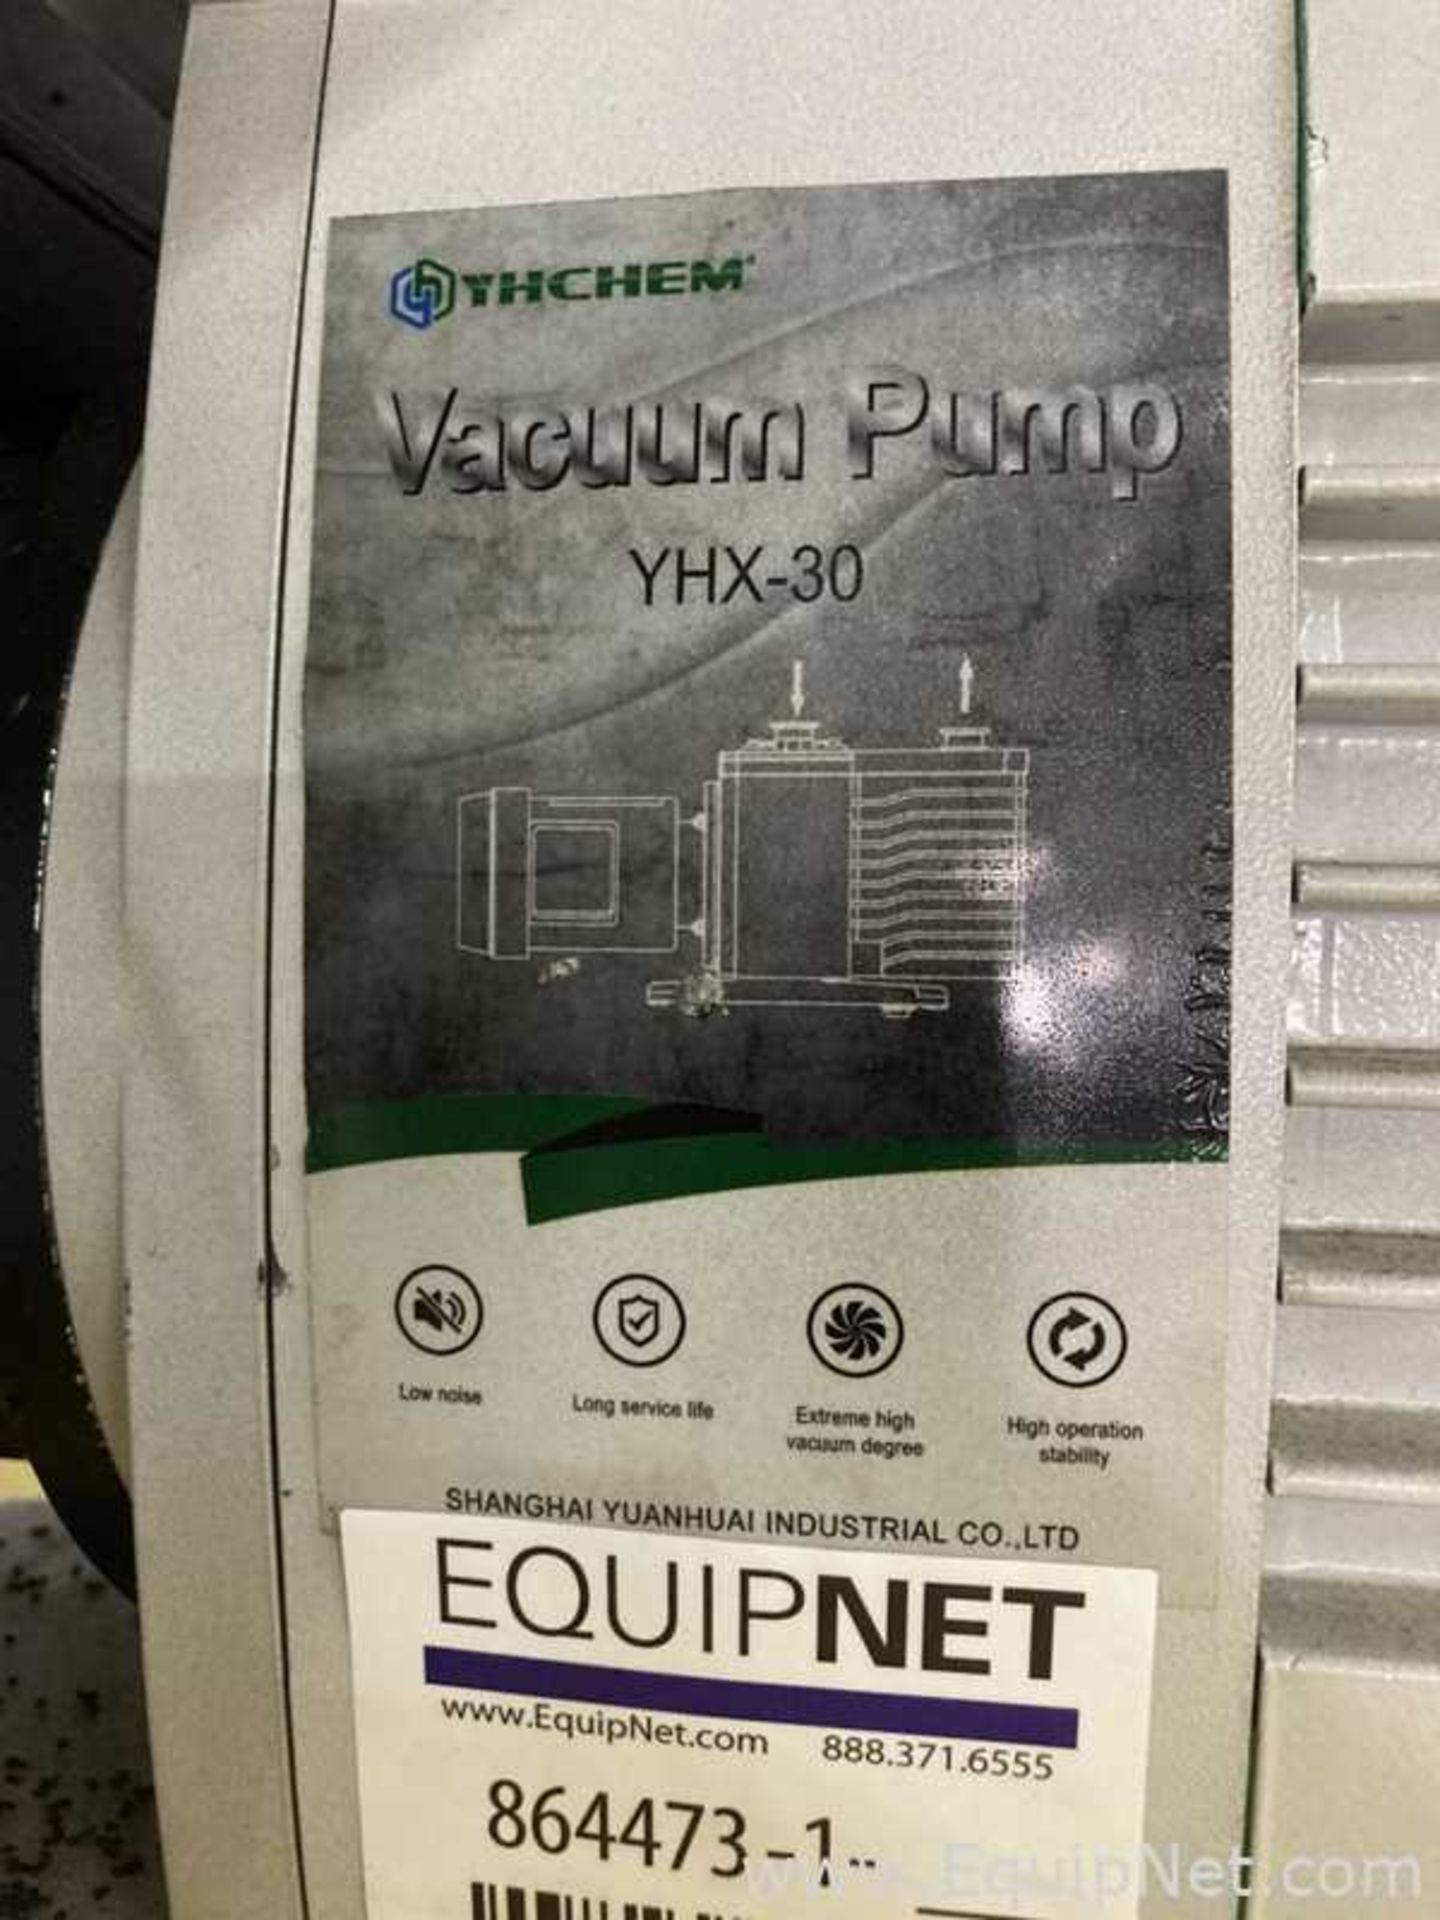 Shanghai Yuanhuai Industrial Co., LTD Yhchem YHX-30 Two Stage Vacuum Pump - Image 7 of 7